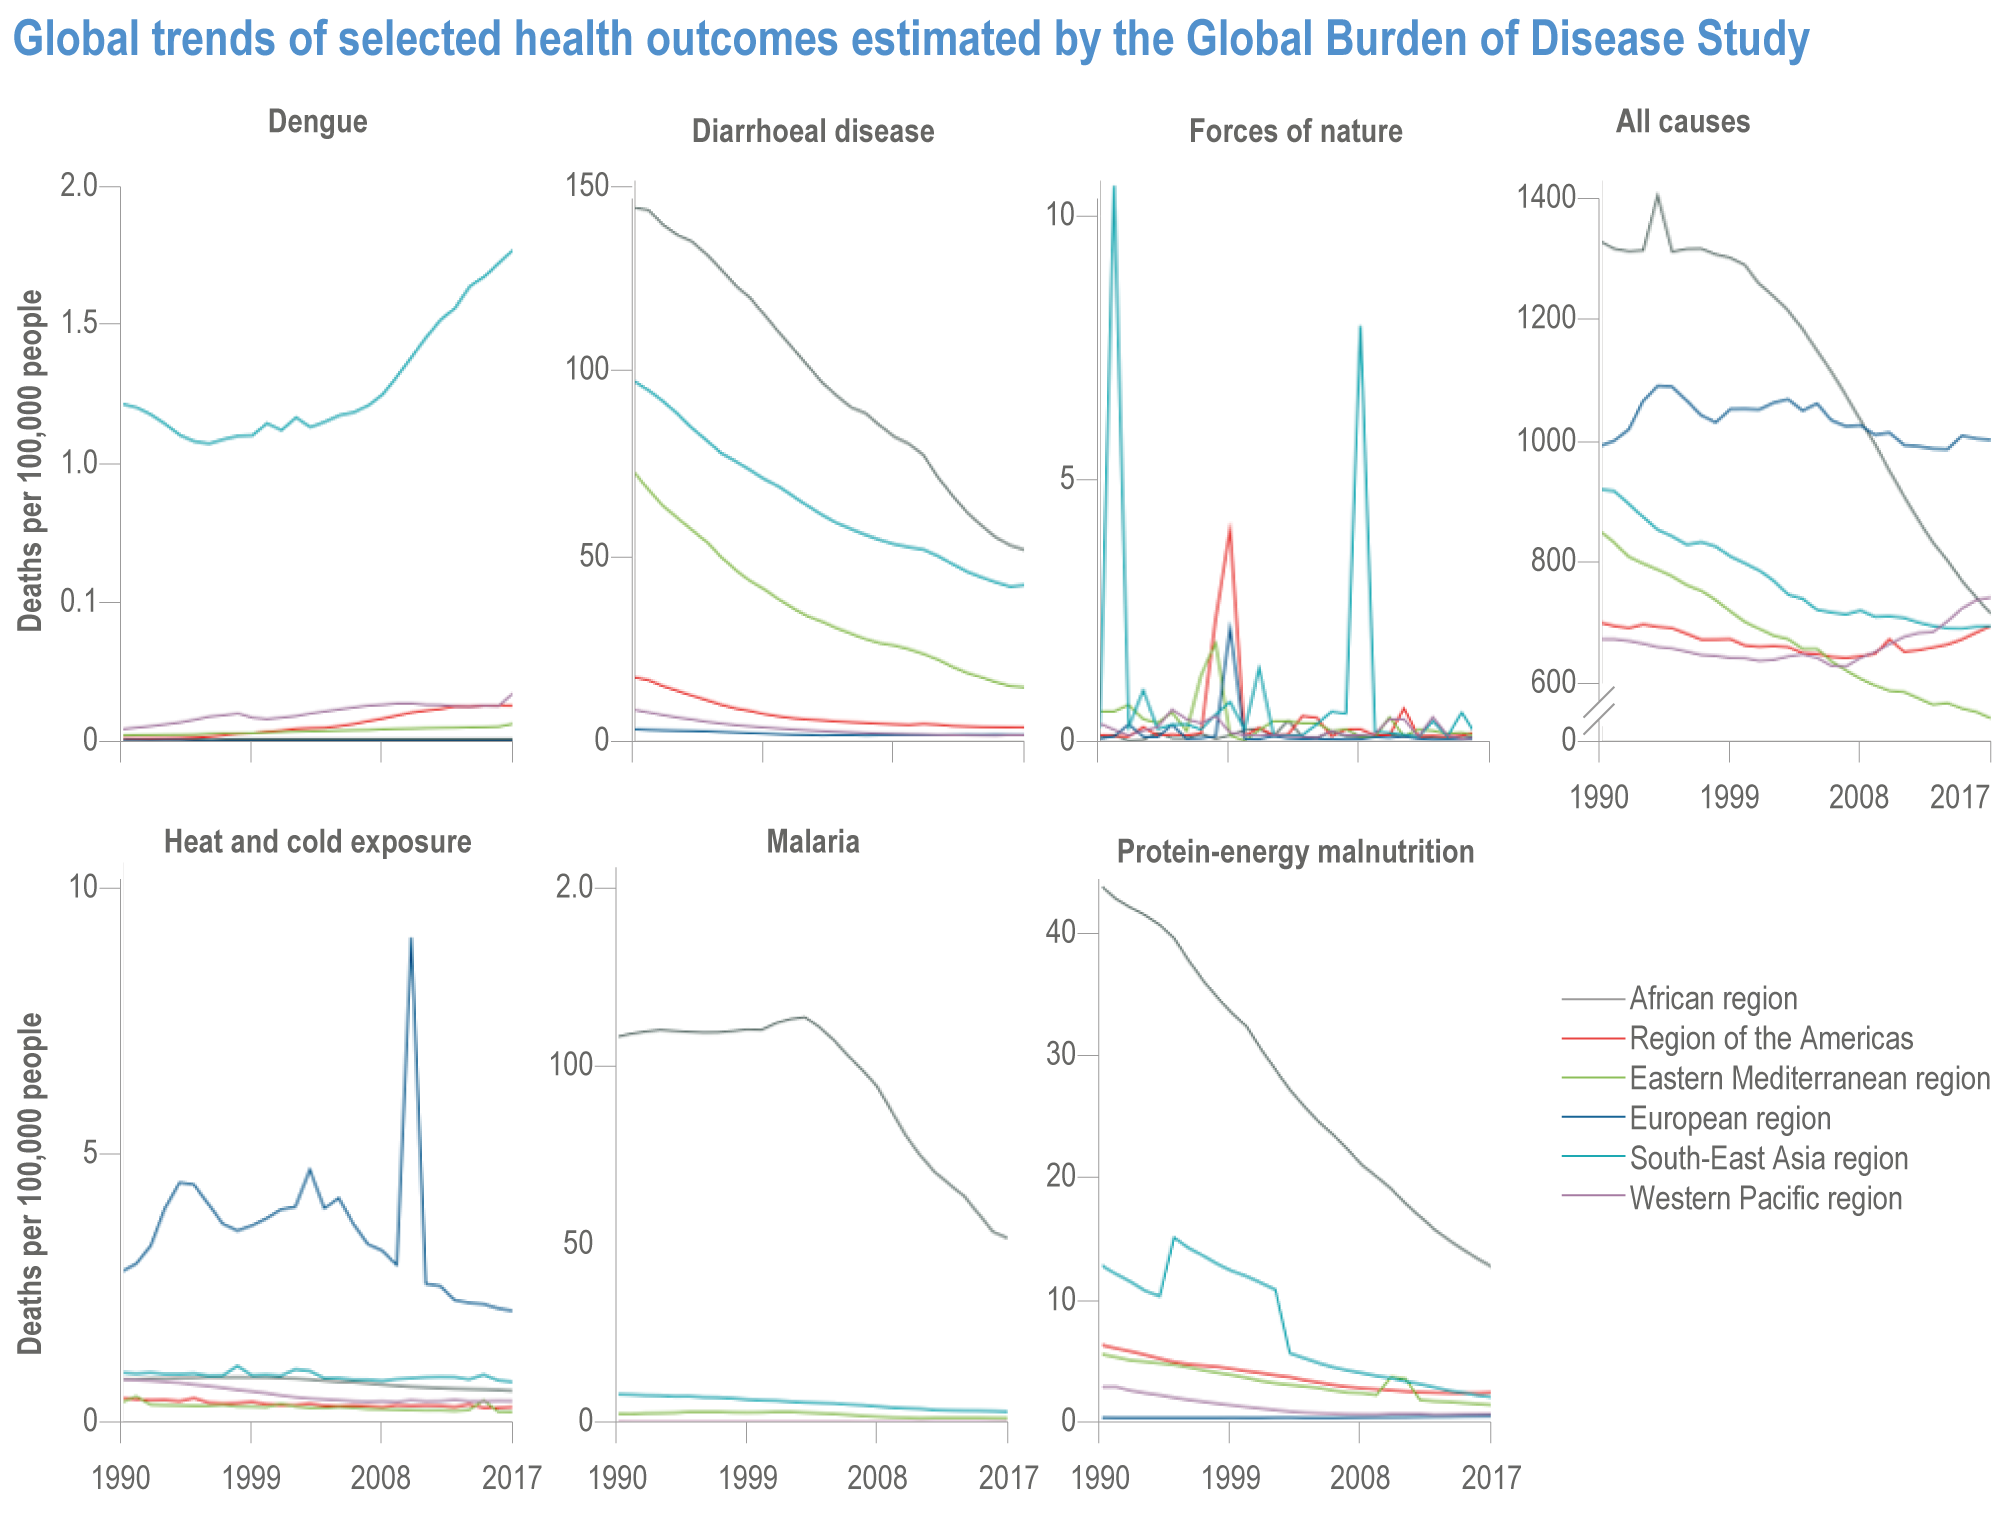 Global trends of selected health outcomes estimated by GBDs.